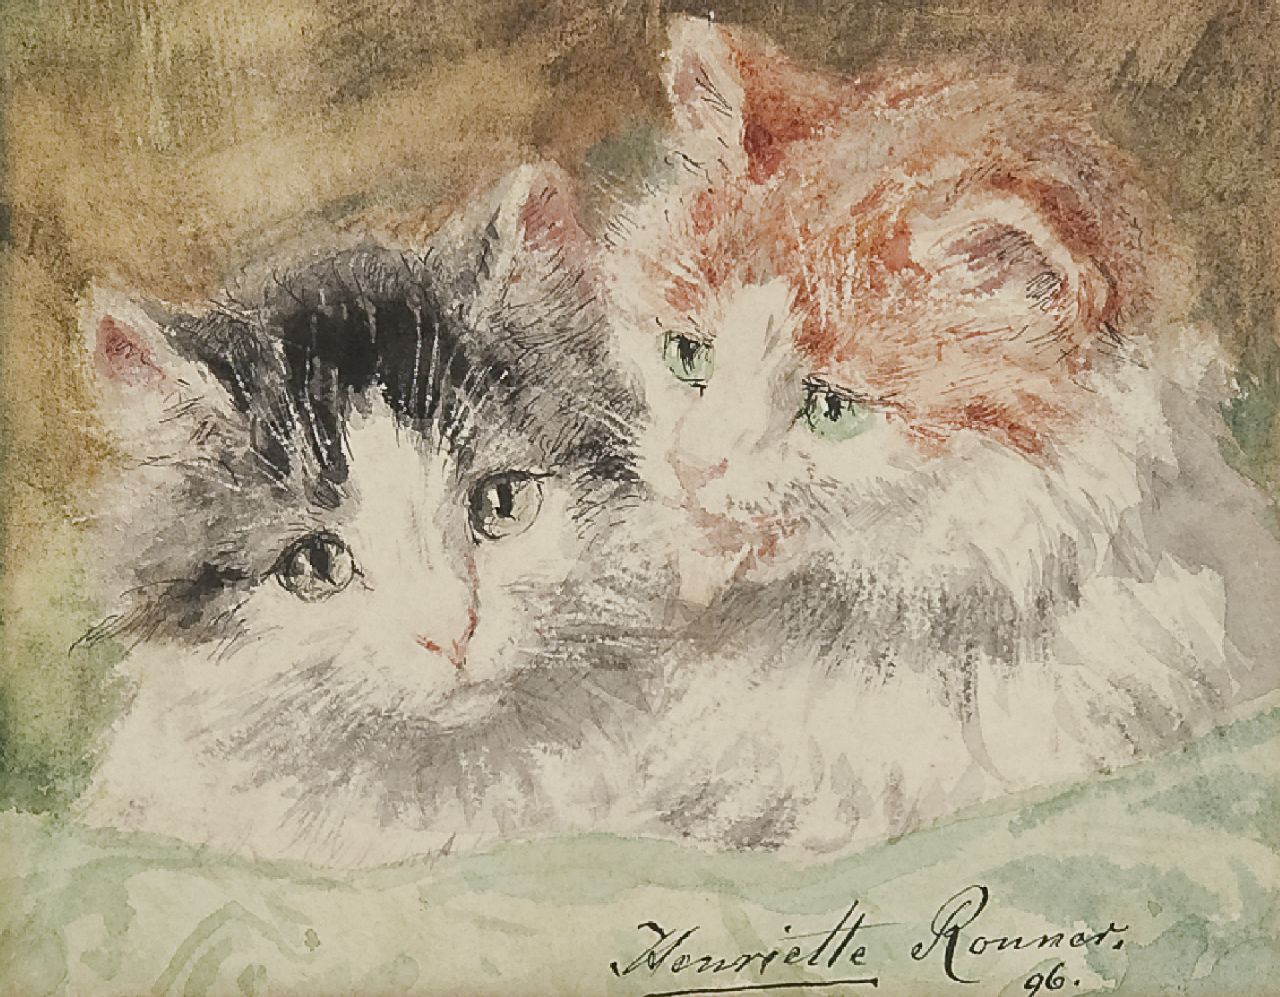 Ronner-Knip H.  | Henriette Ronner-Knip, Two kittens, watercolour on paper 12.2 x 15.3 cm, signed l.r. and dated '96